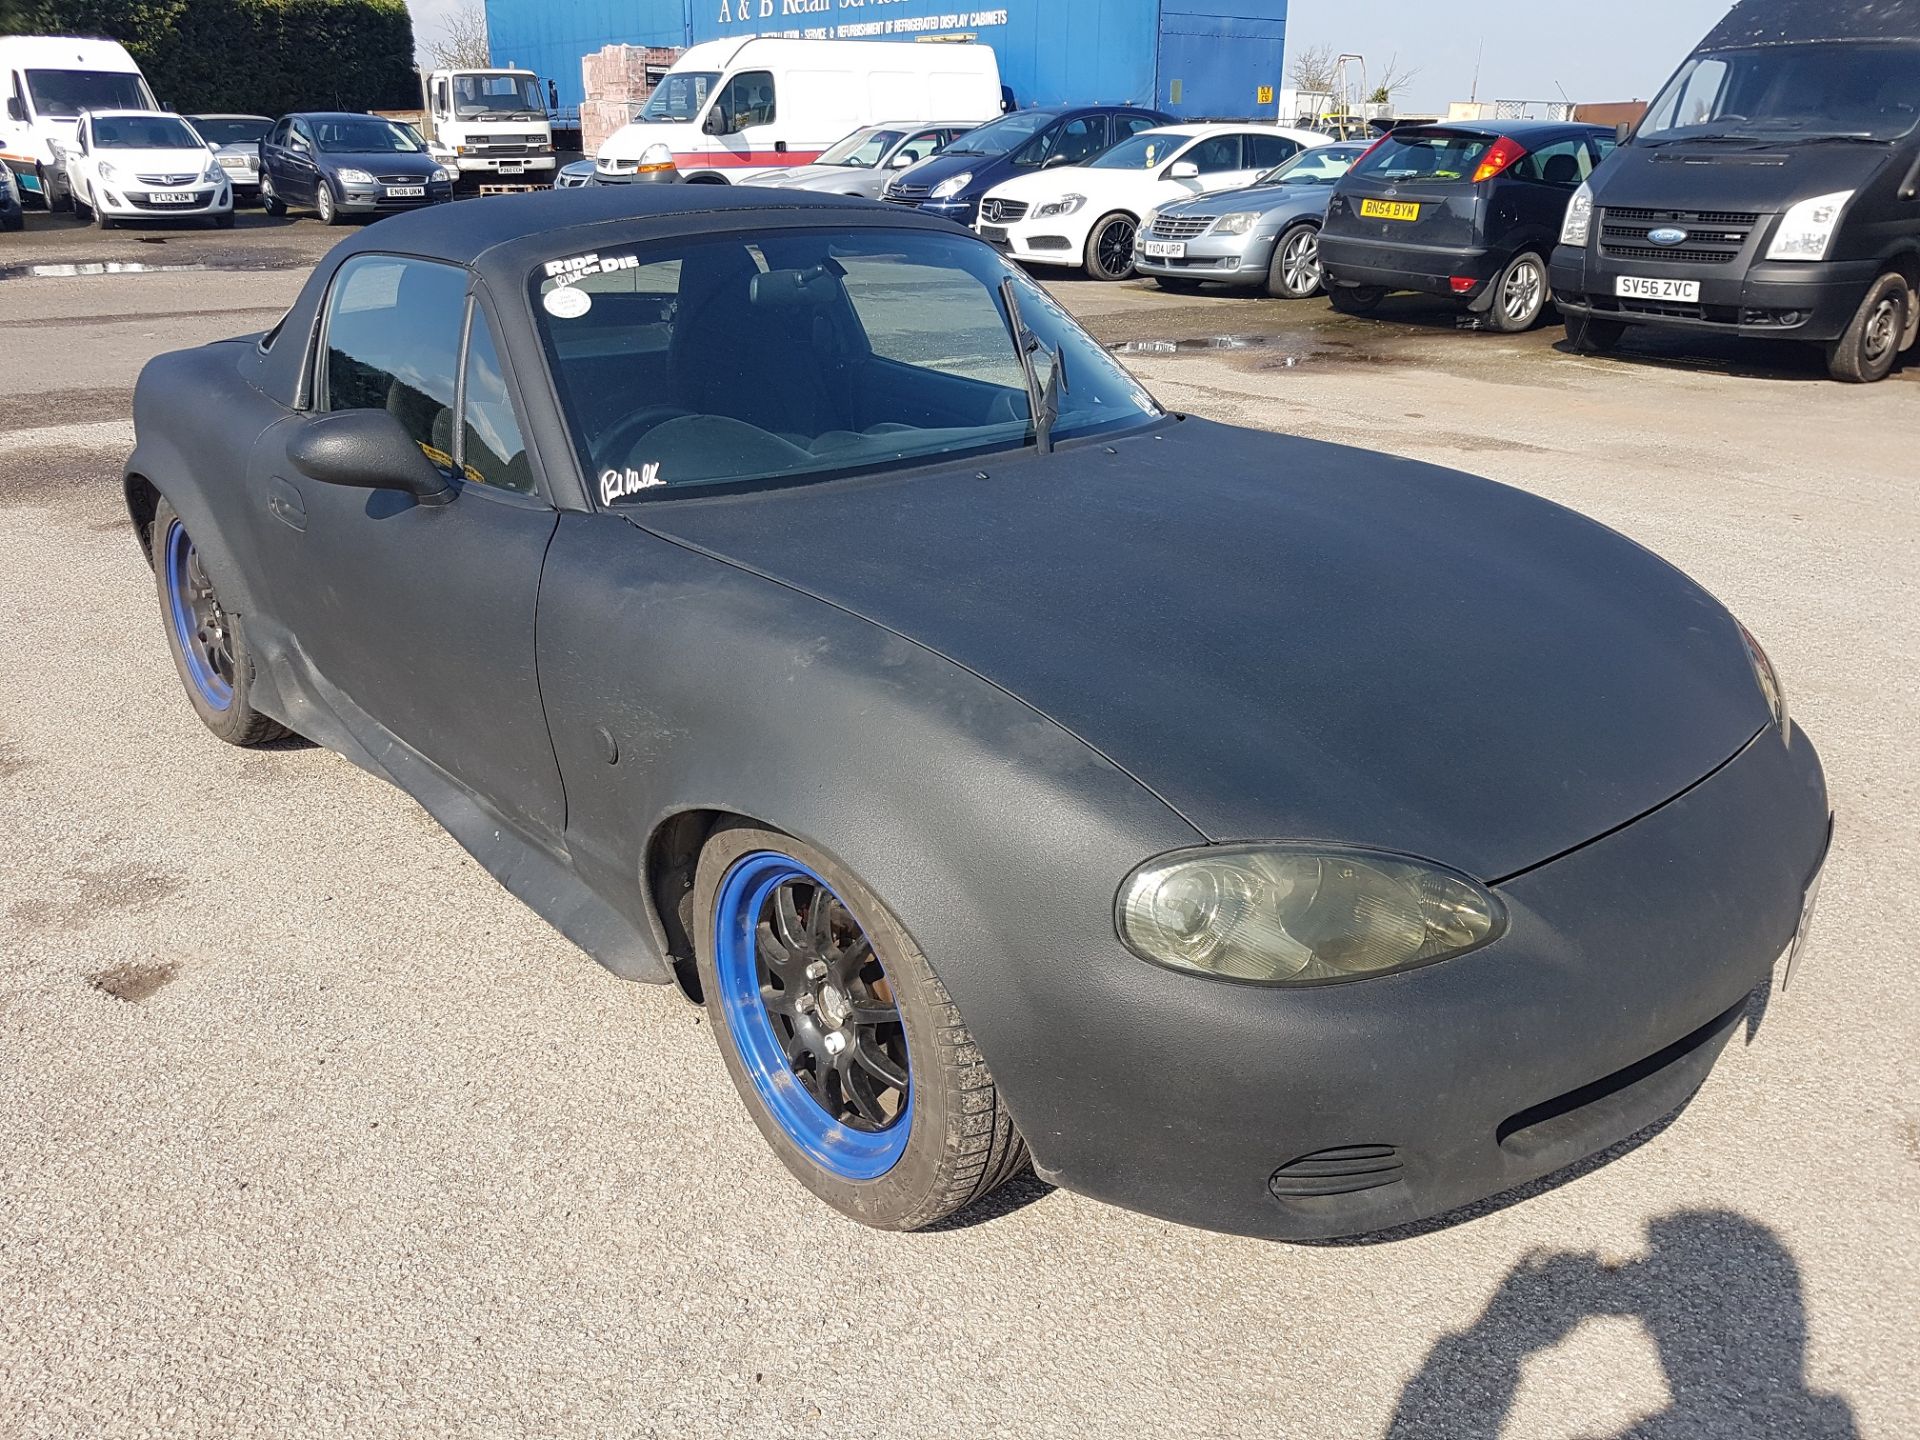 1998 BLACK MAZDA MX-5 SPORT 1265KG, LIGHT AND FAST CAR! HARDTOP FITTED BUT IT IS A CONVERTIBLE